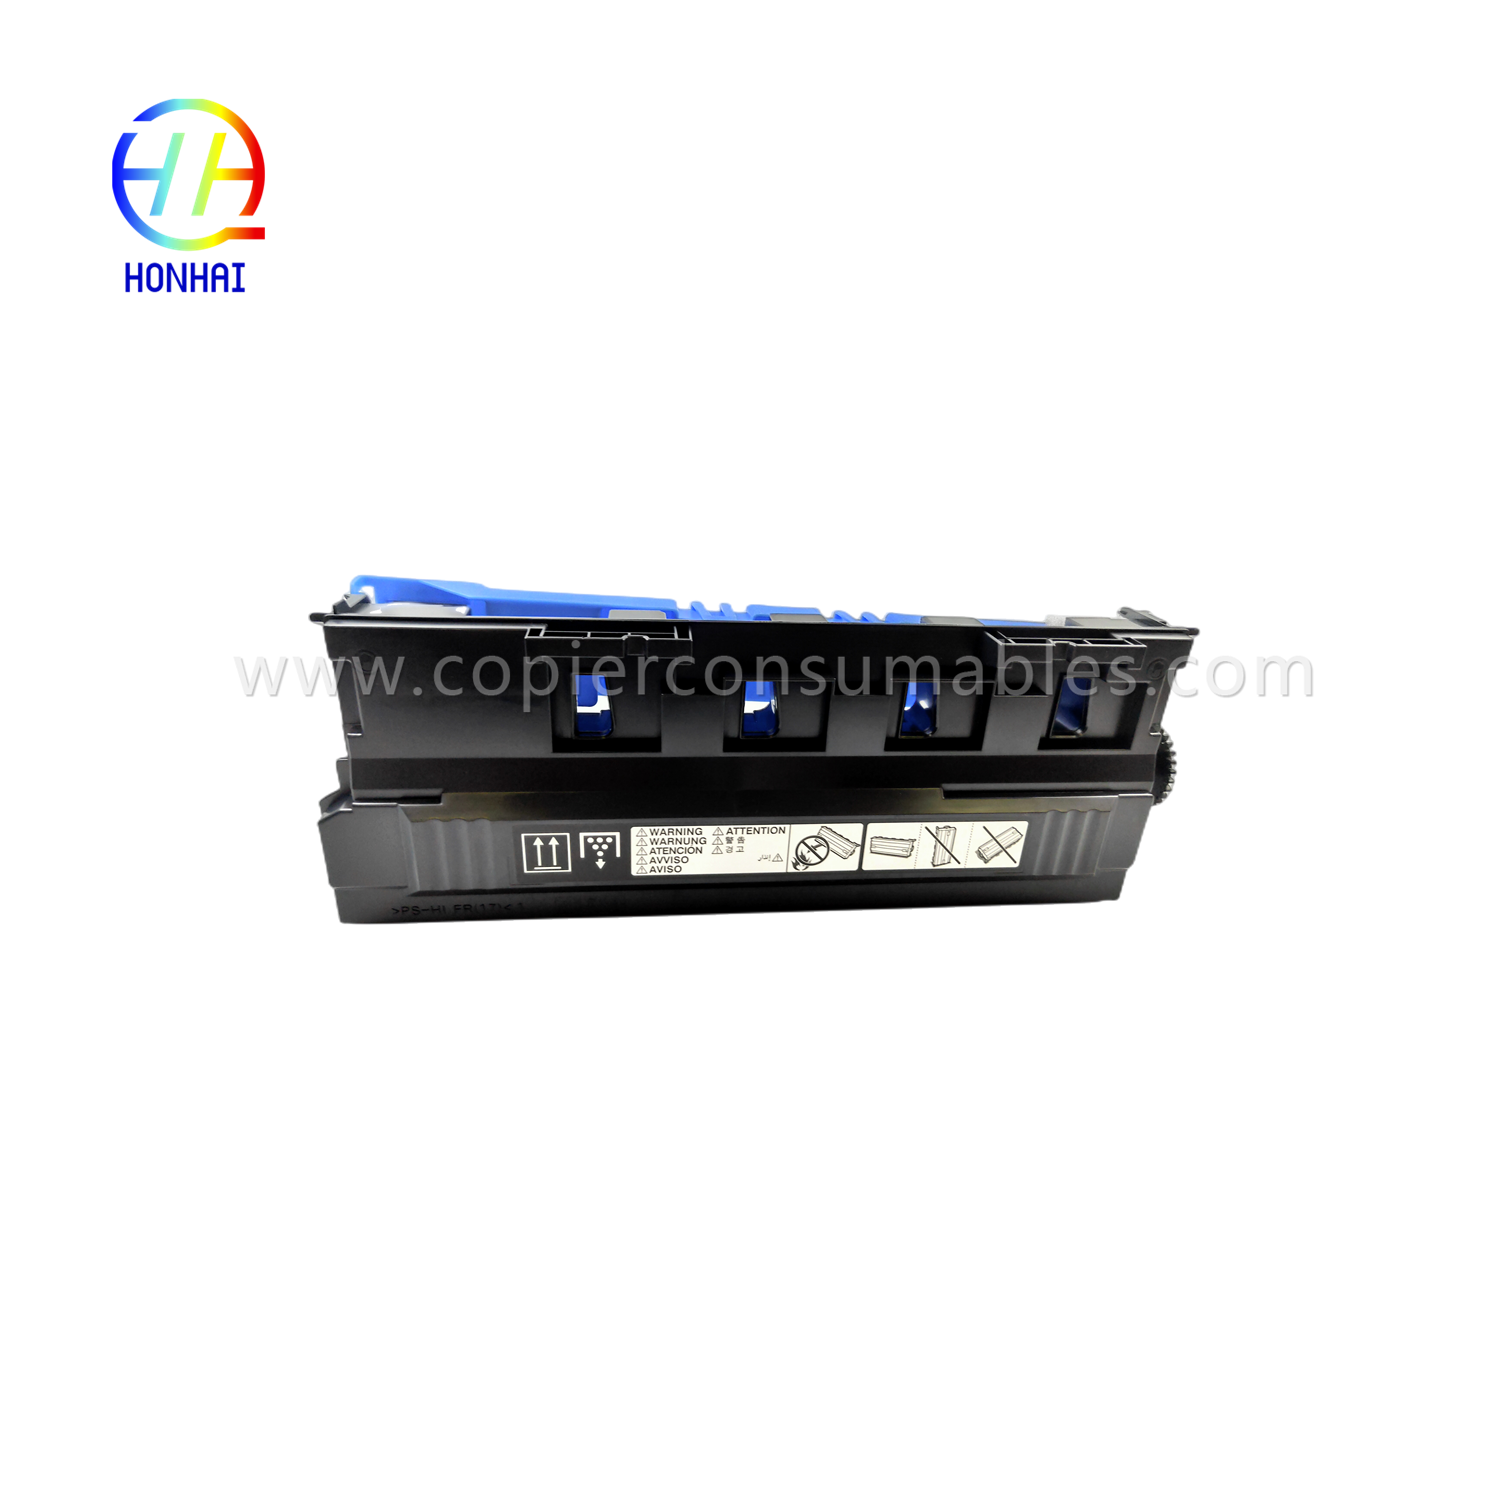 https://c585.goodao.net/waste-toner-container-for-konica-minolta-bizhub-c226-c256-c266-c227-c287-c367-c7333-c7226-c7528-wx-105-a8jjwy- টোনার-বক্স-পণ্য/